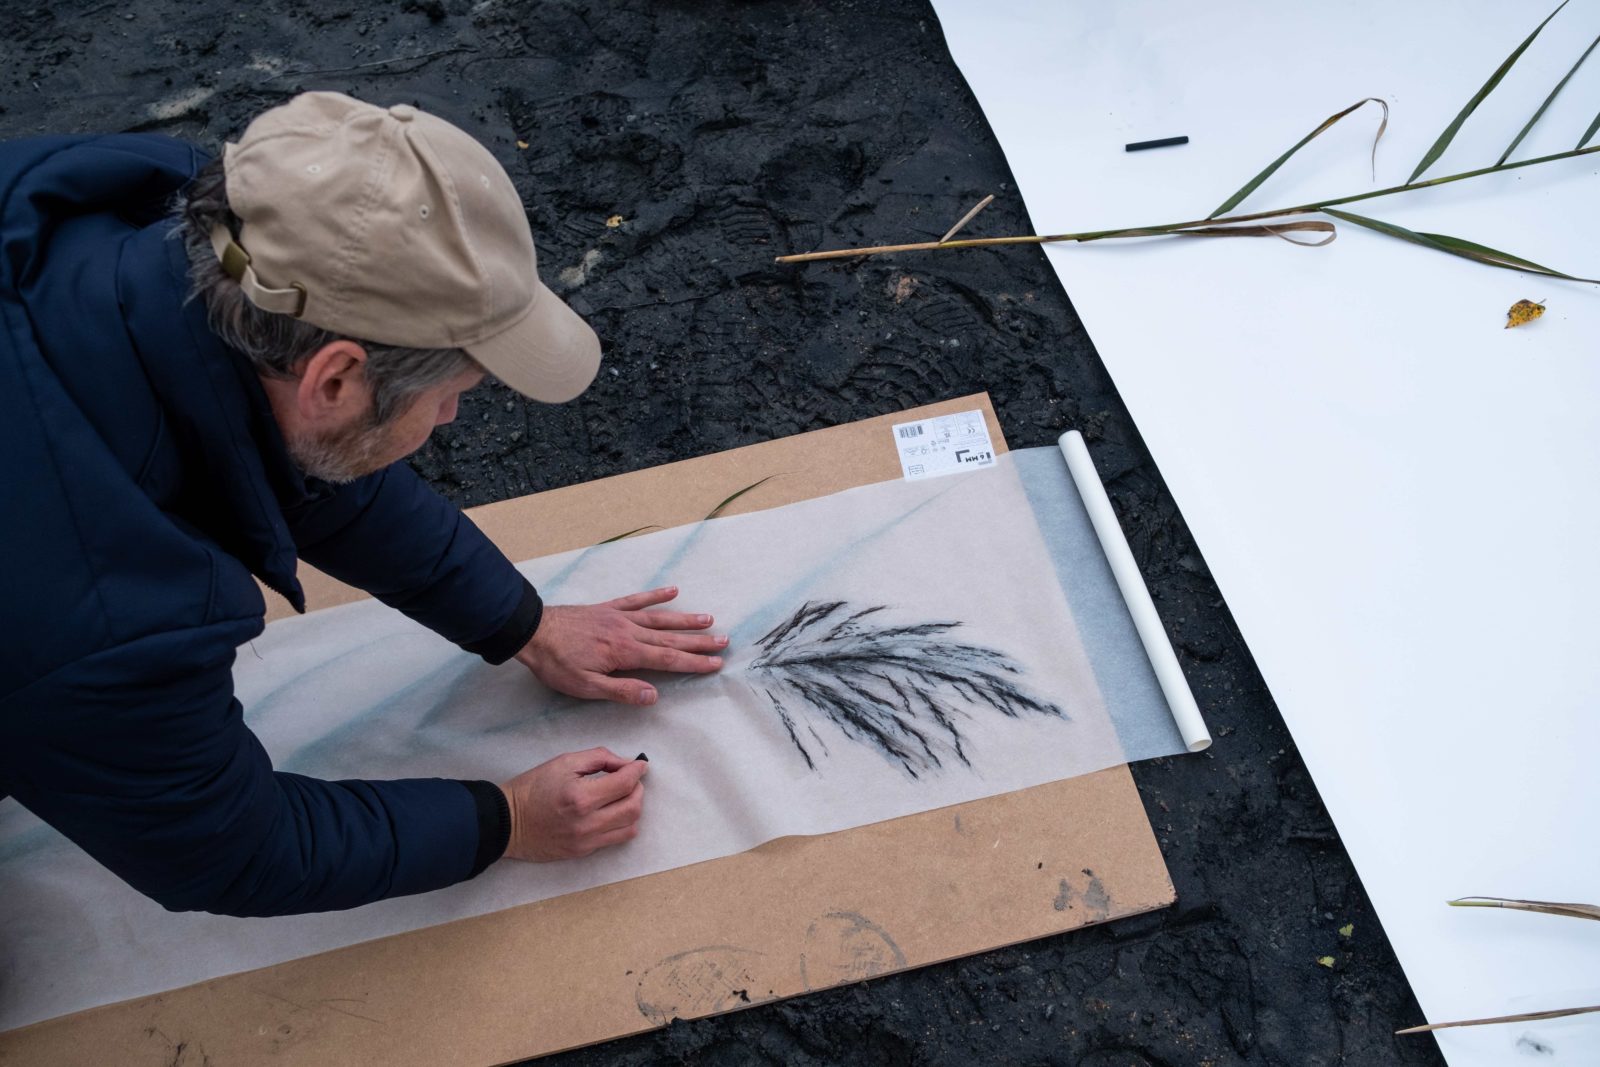 A man is doing a charcoal rubbing of a stalk, leaning on a board. The ground beneath him is a former slag heap, and is soft and black.